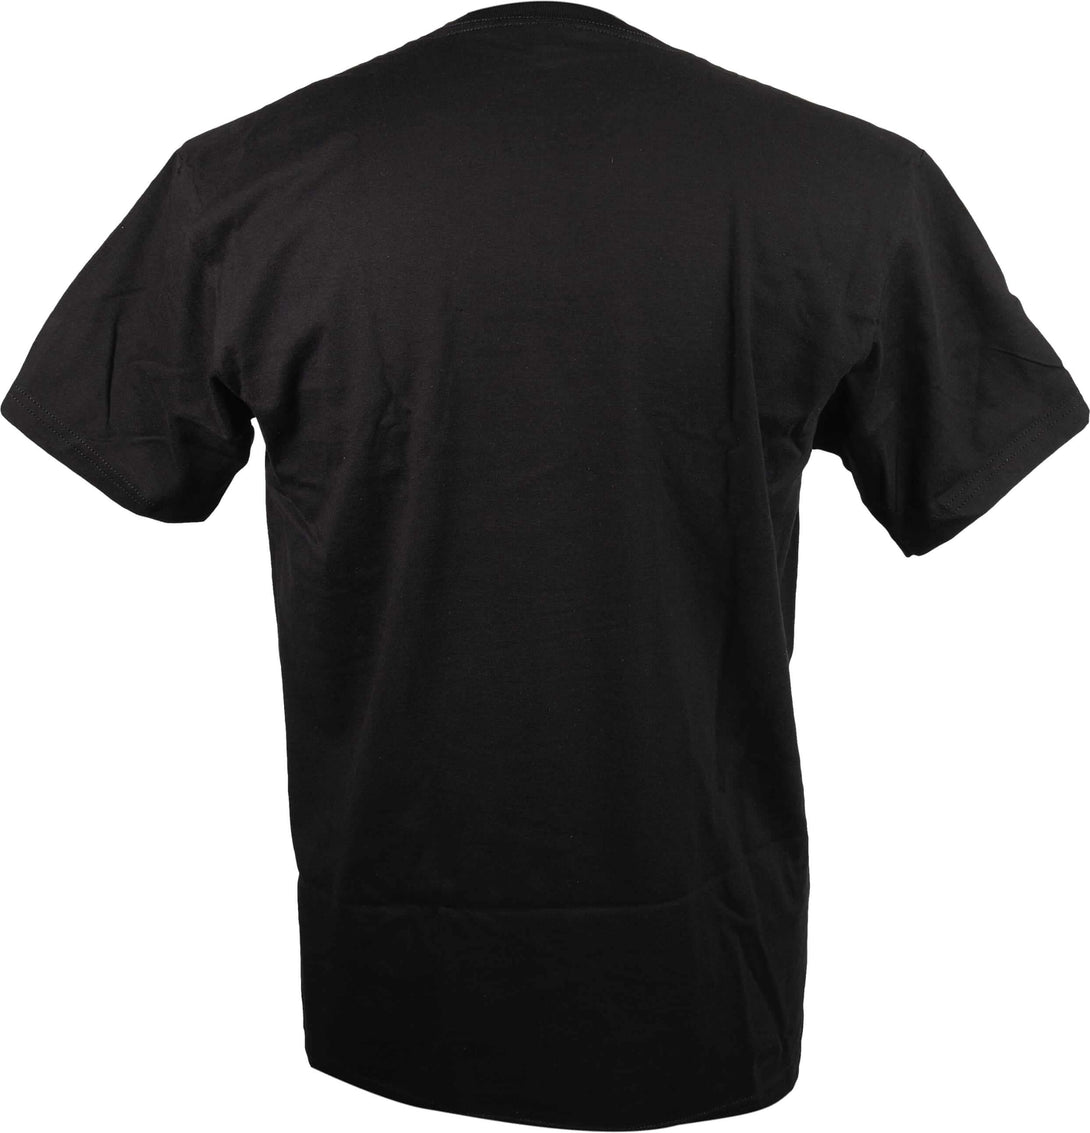 Frontpage bass fishing TShirt in Black back